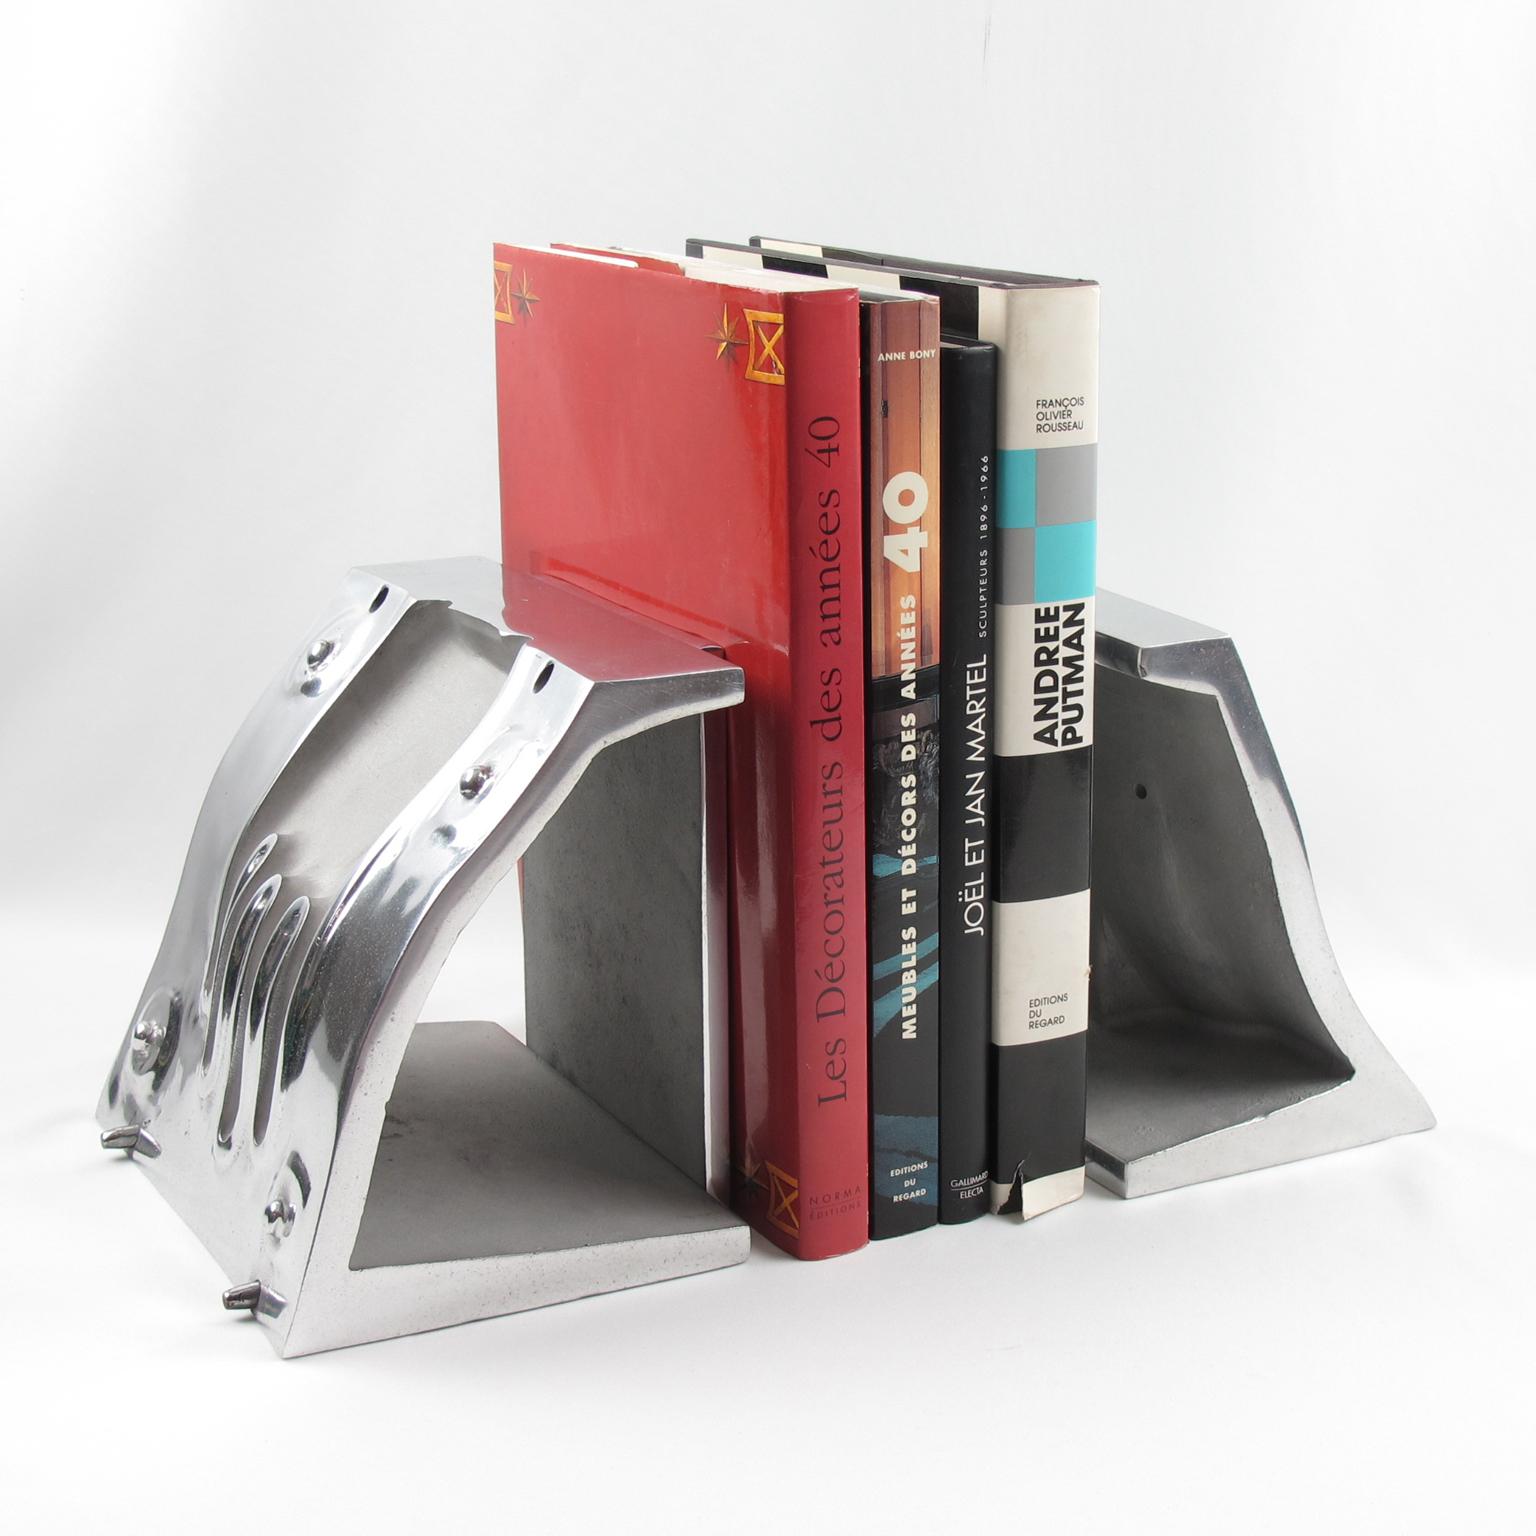 Important Industrial Metal Mold Sculpture Bookends, a pair In Excellent Condition For Sale In Atlanta, GA